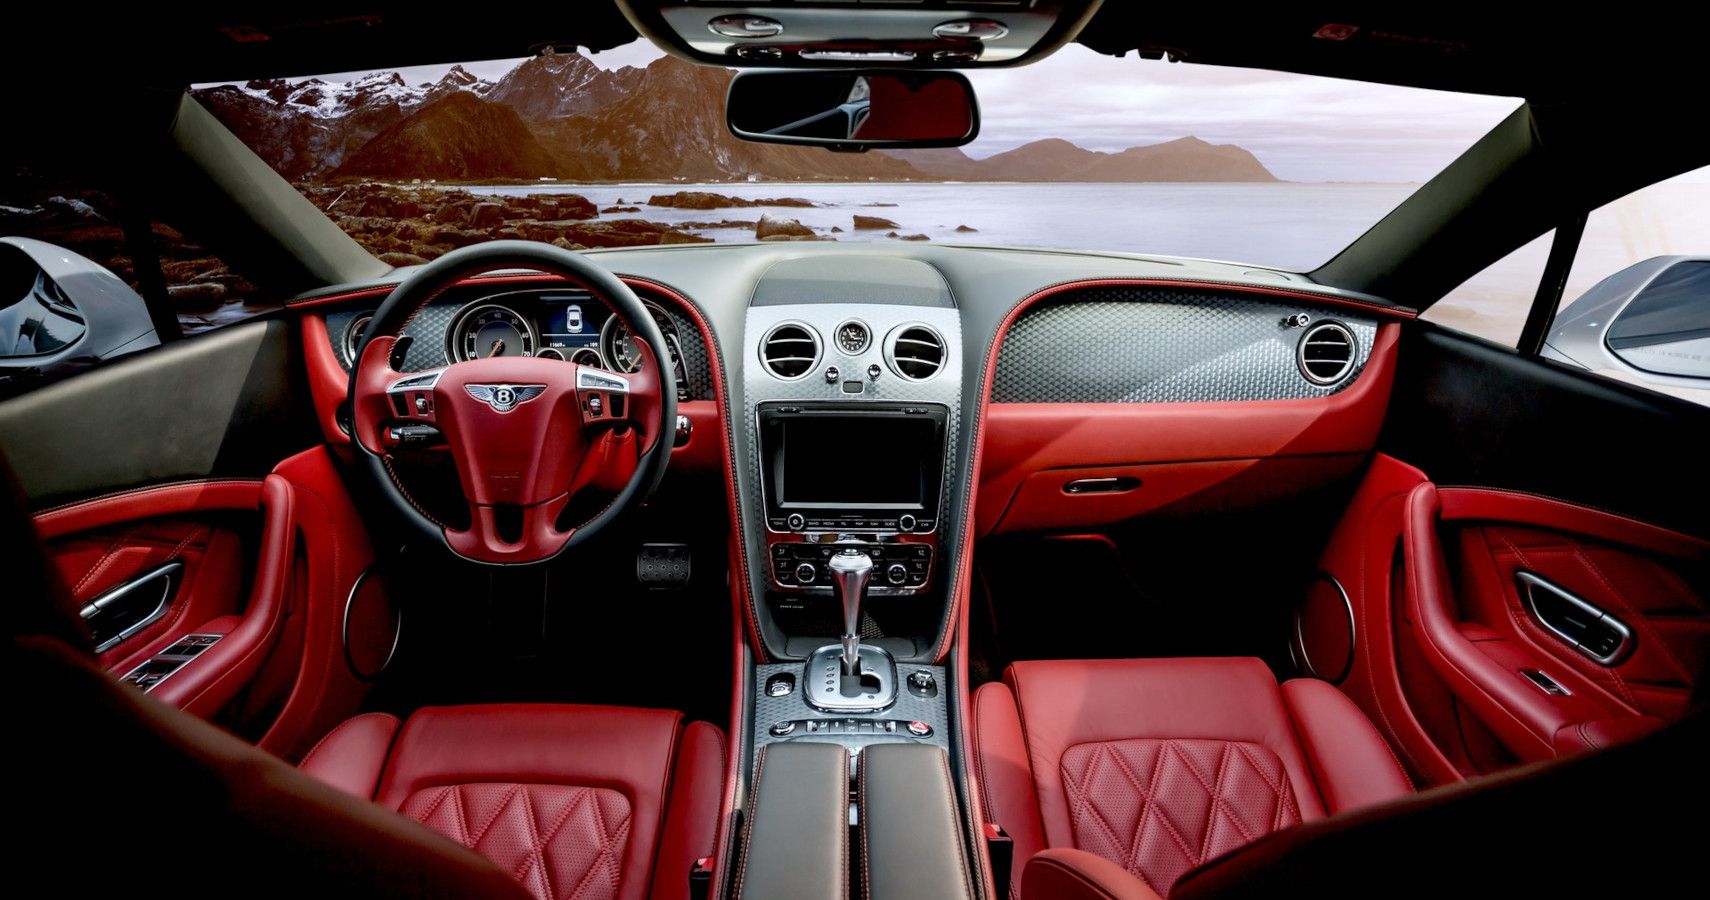 Inside a vehicle with red upholstery